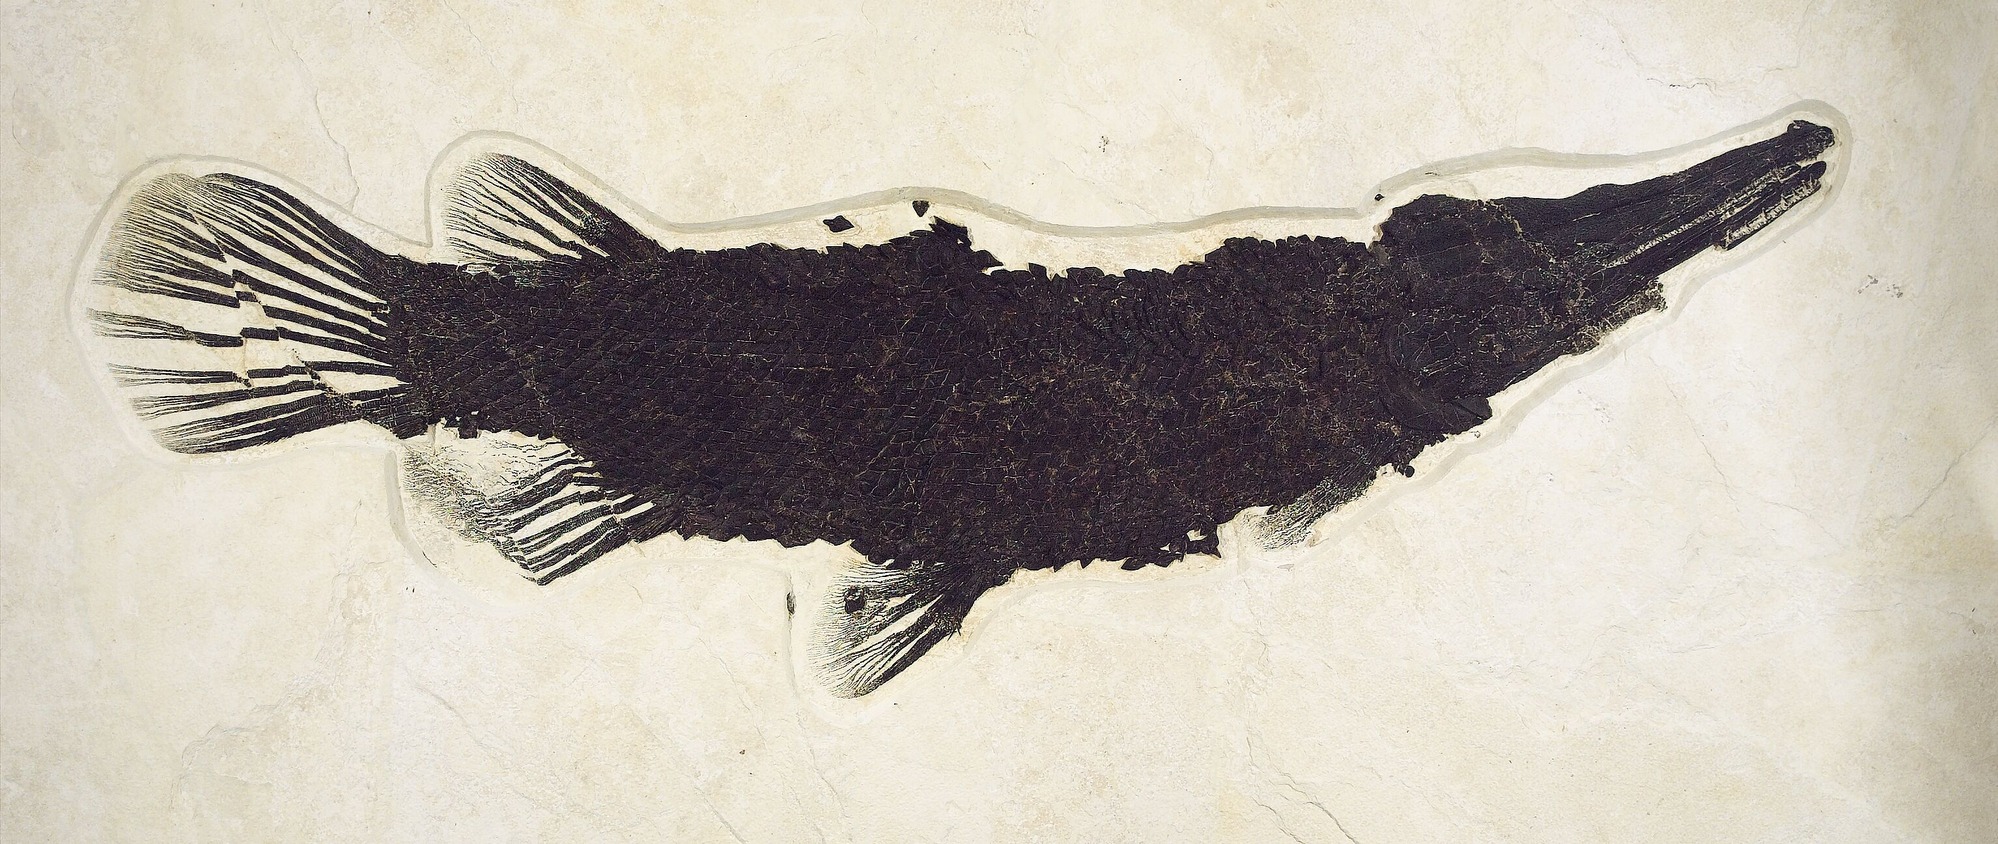 A dark brown, nearly black, fish fossil on pale tan stone.  The scales remain on the fish.